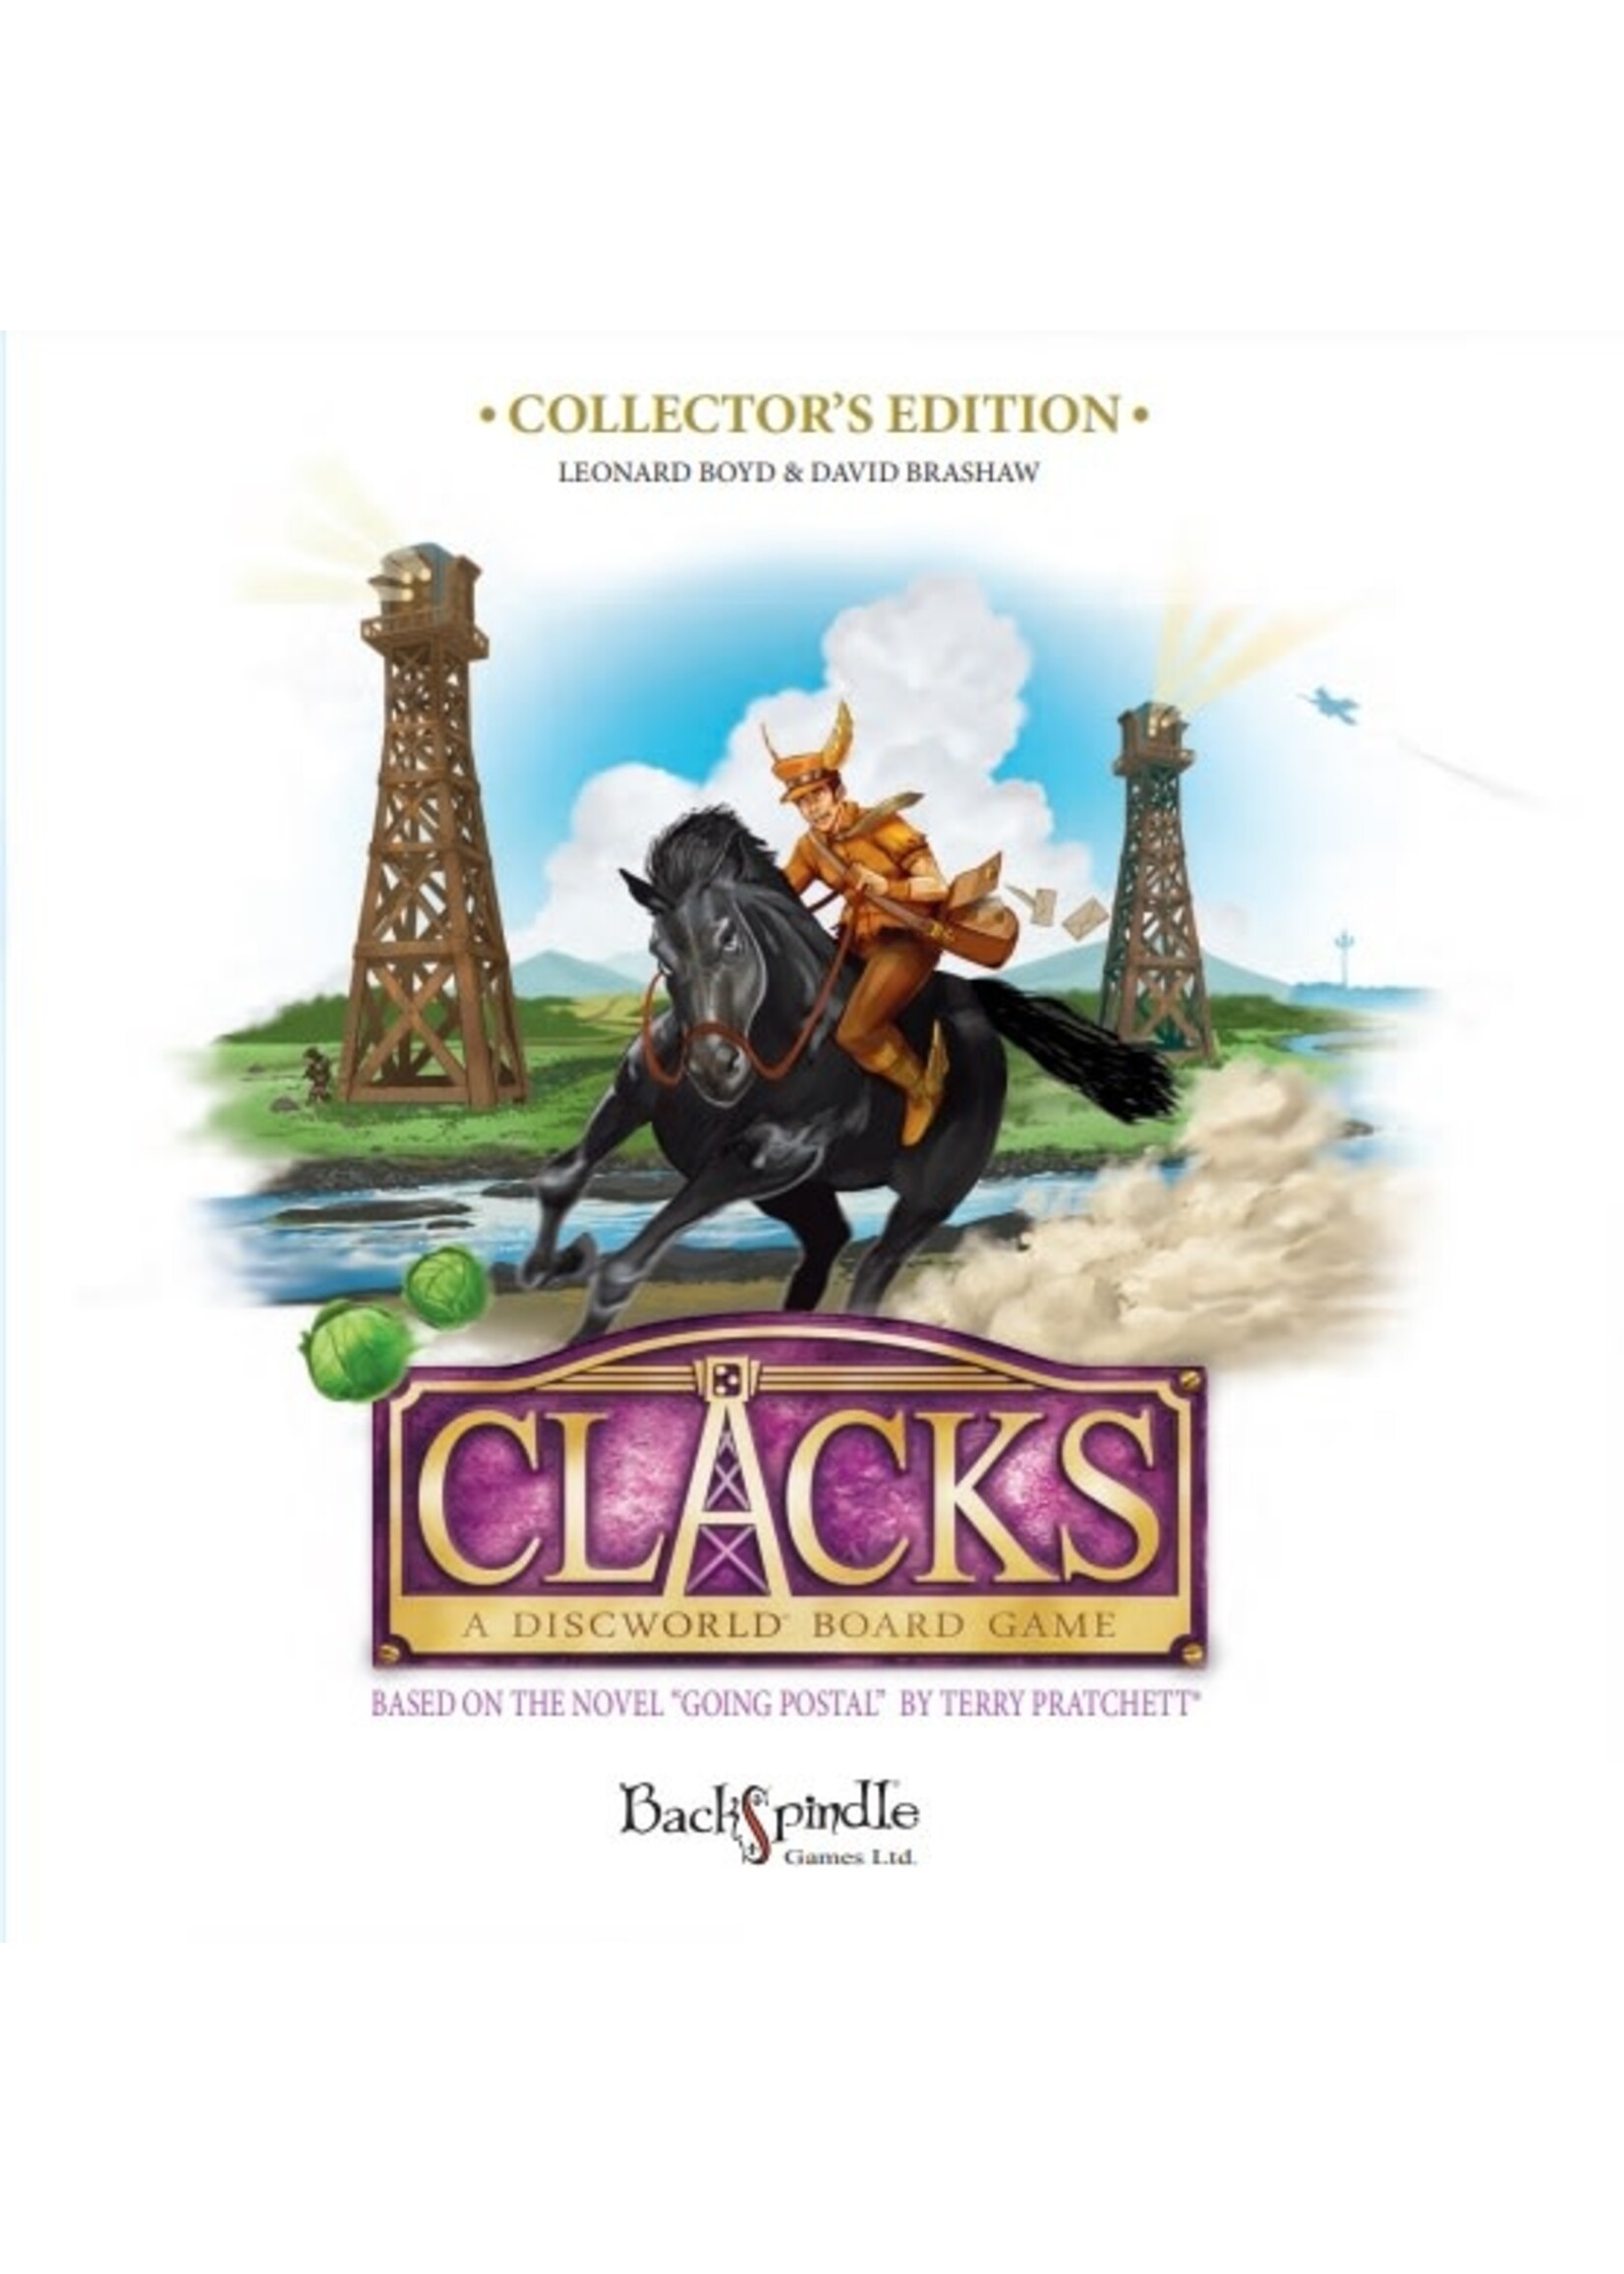 Backspindle Games Collector's Edition: Clacks - A Discworld Board Game